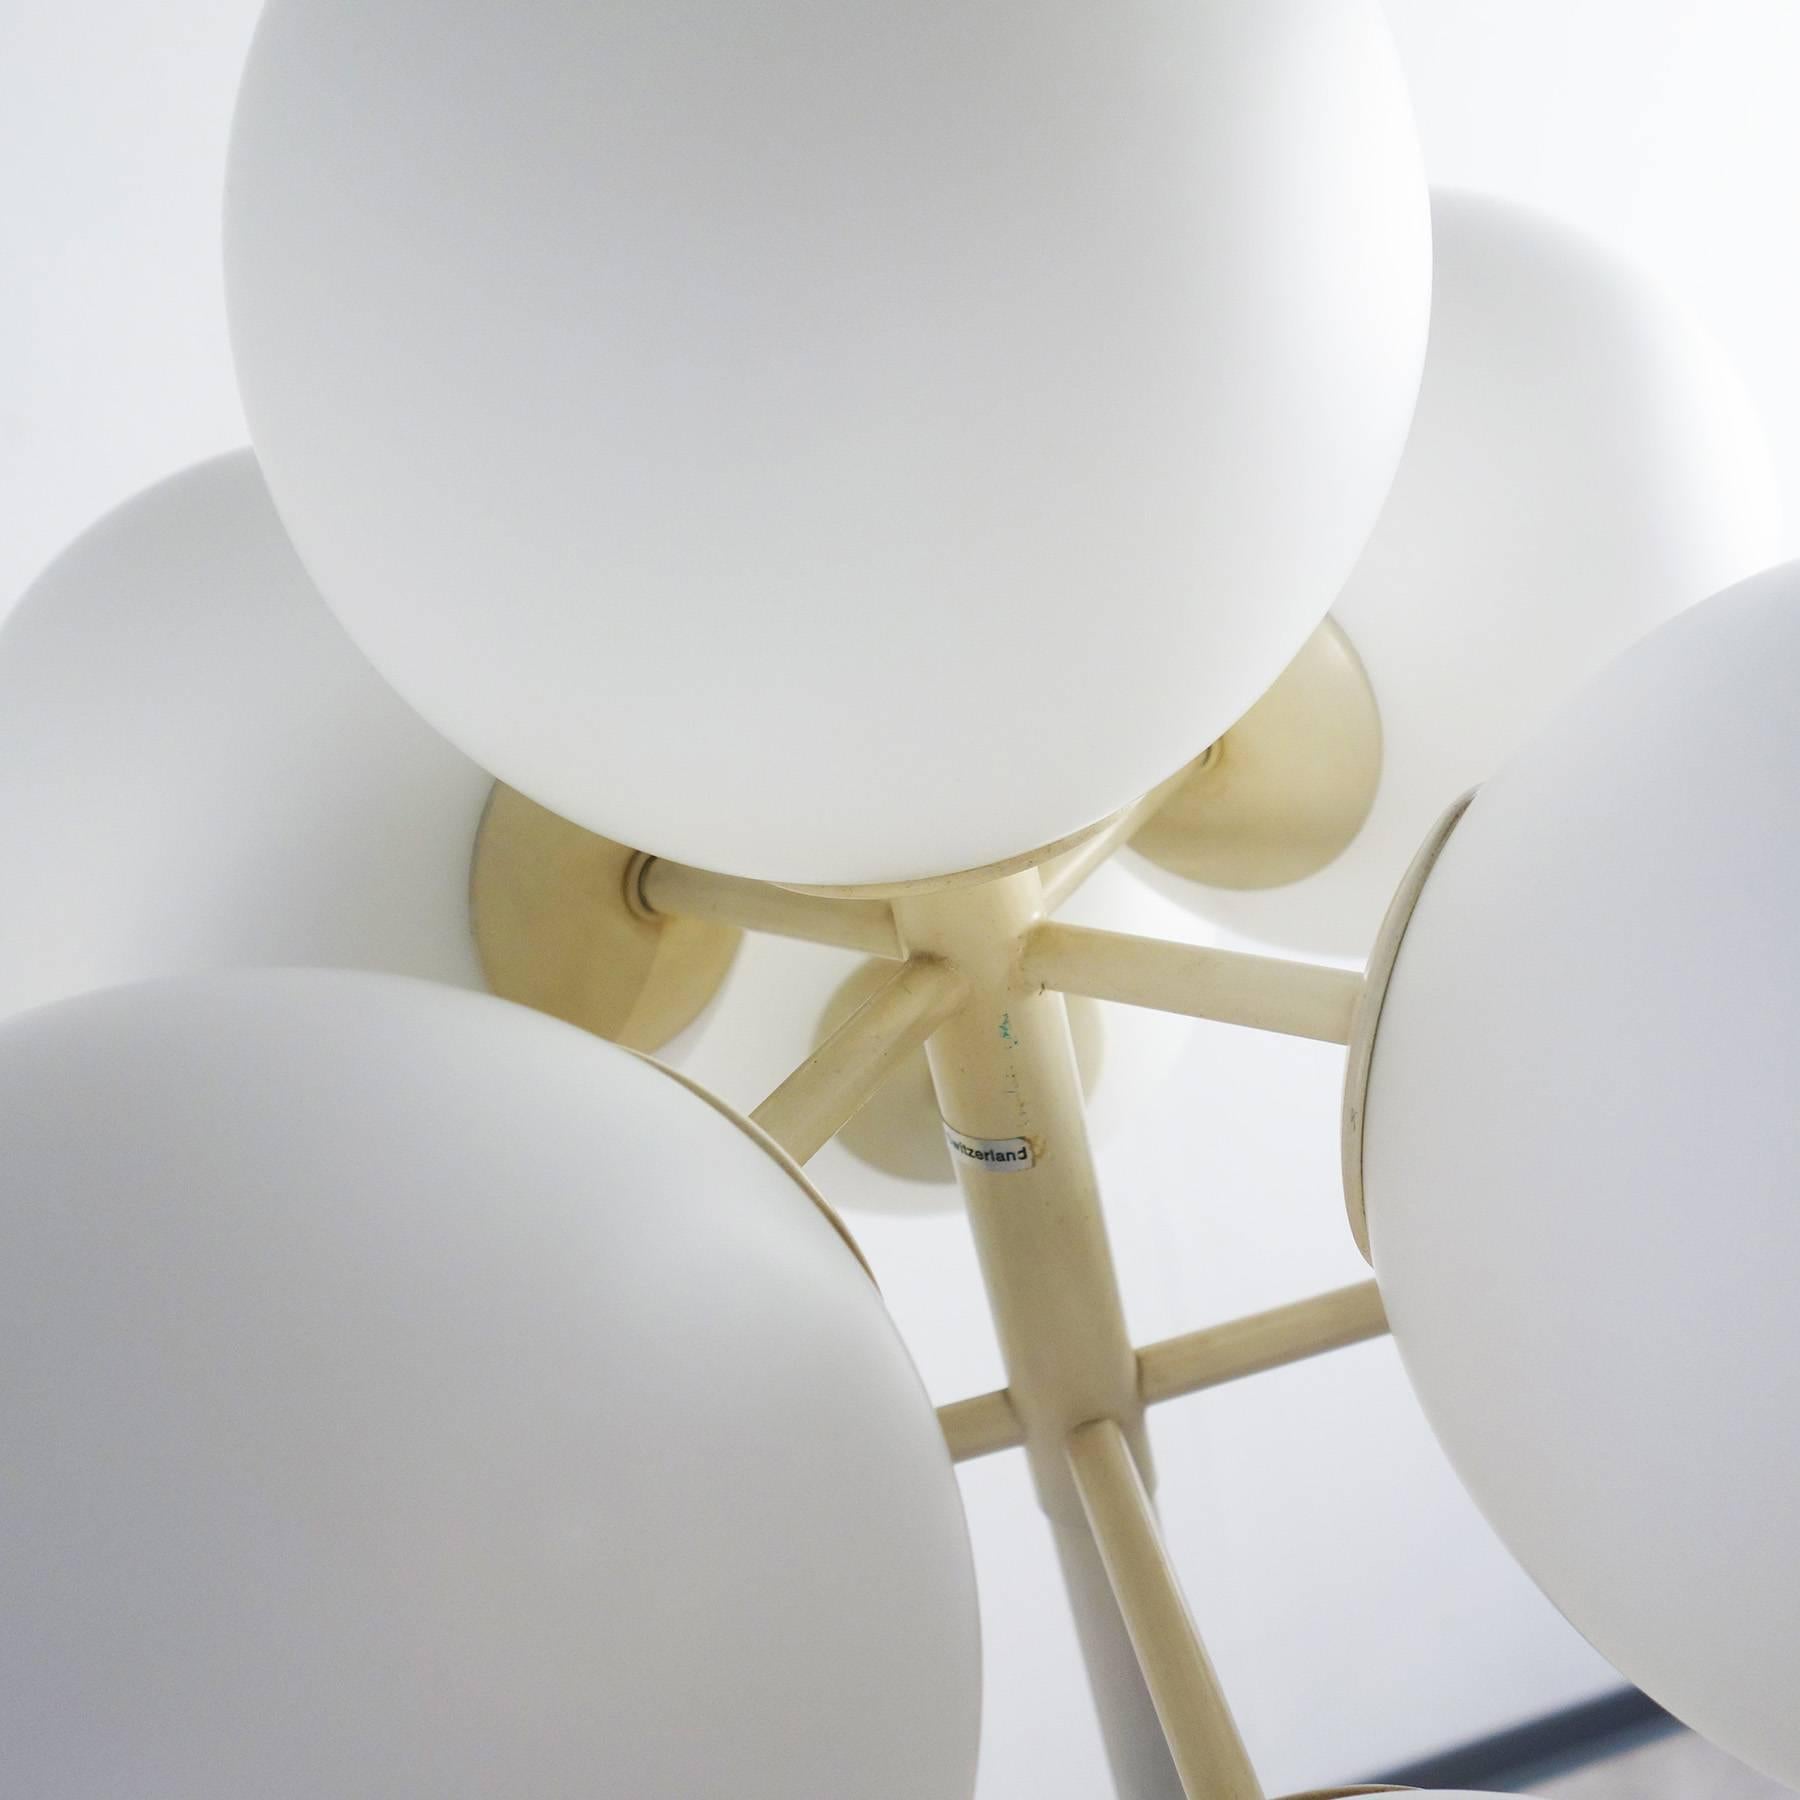 Frosted Space Age Bubble Lamp from the 1960s, Made by Temde Leuchten